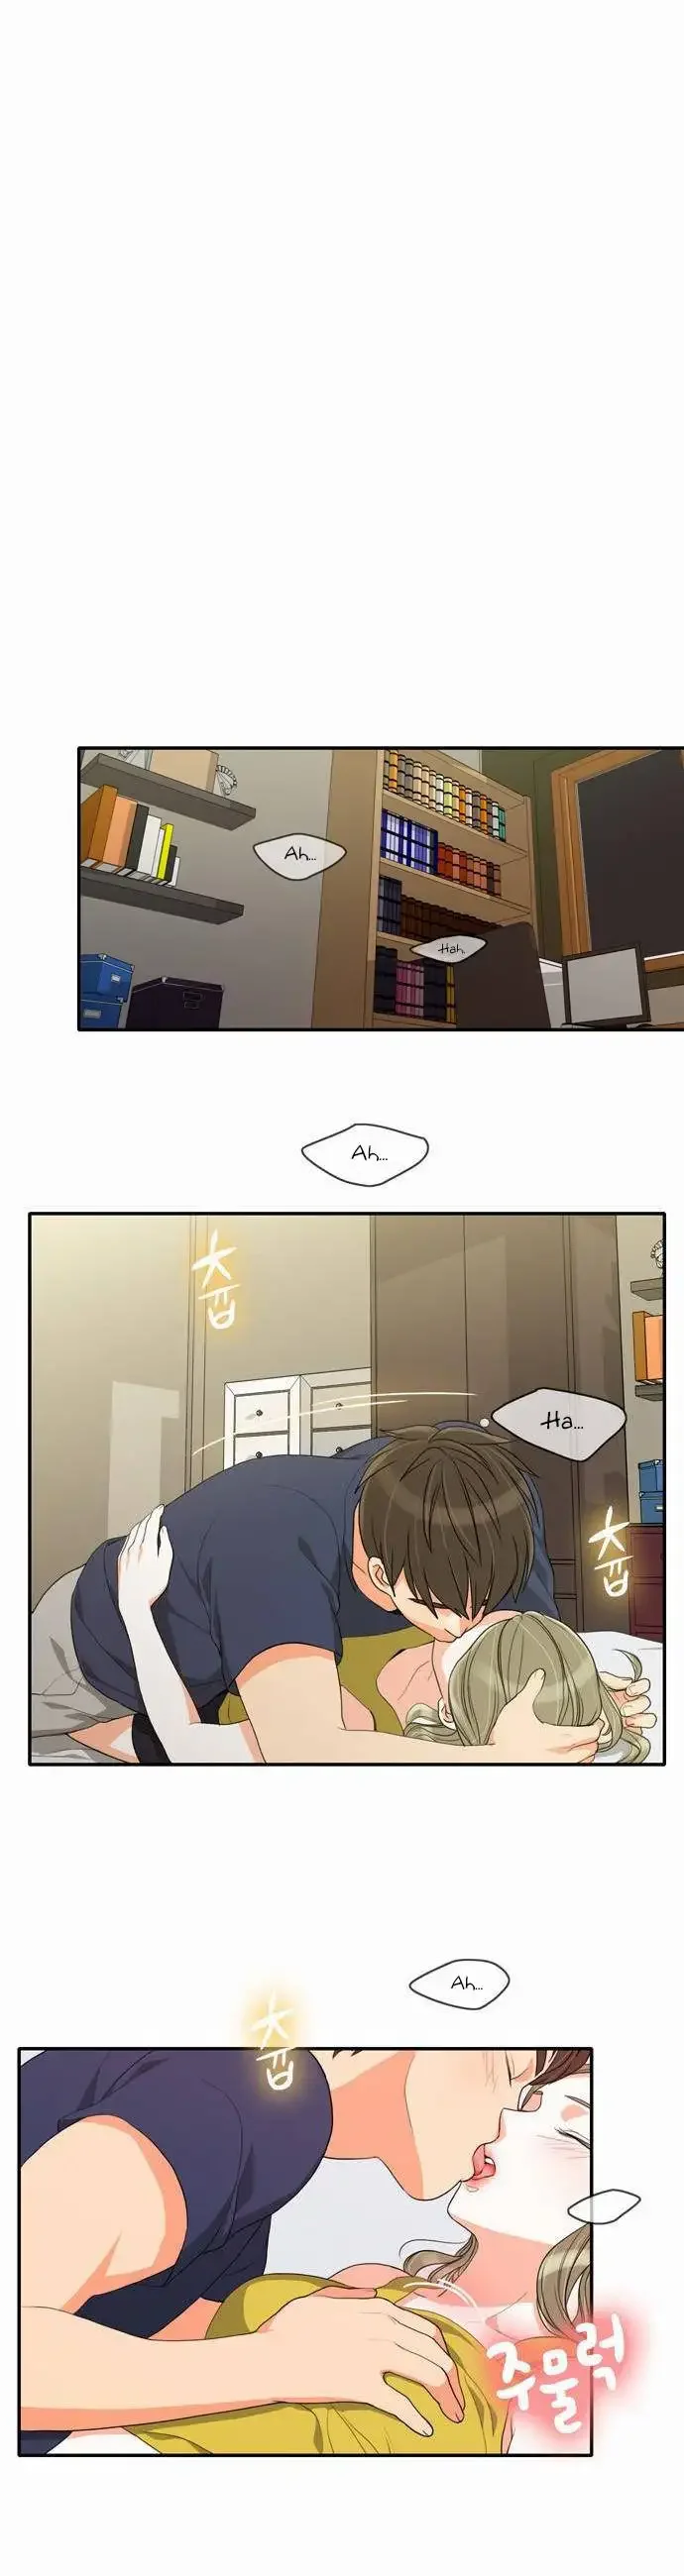 do-it-one-more-time-chap-37-6